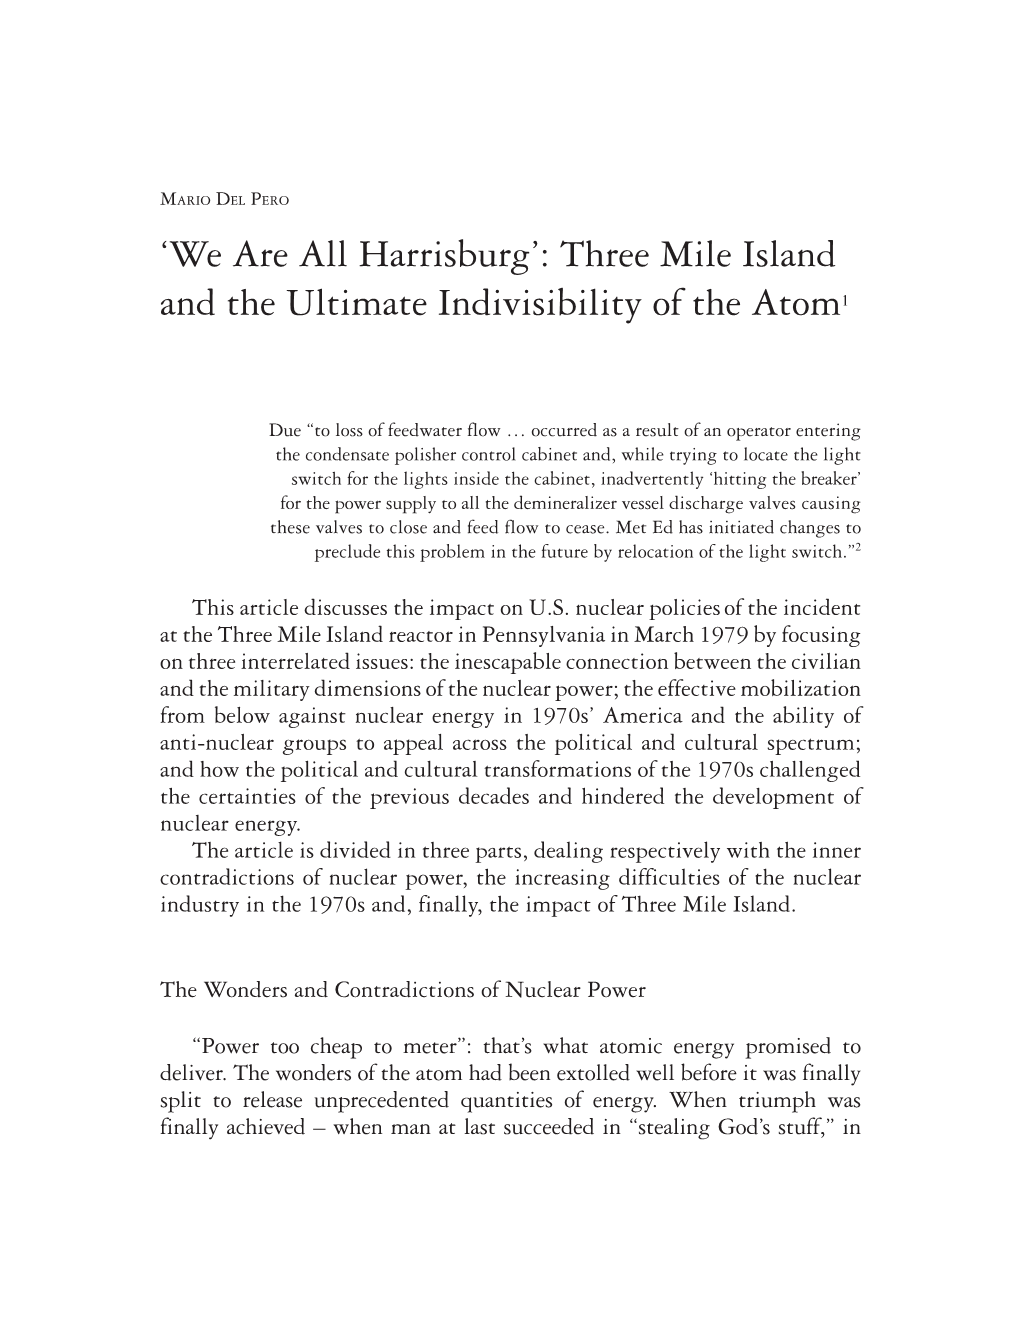 We Are All Harrisburg’: Three Mile Island and the Ultimate Indivisibility of the Atom1